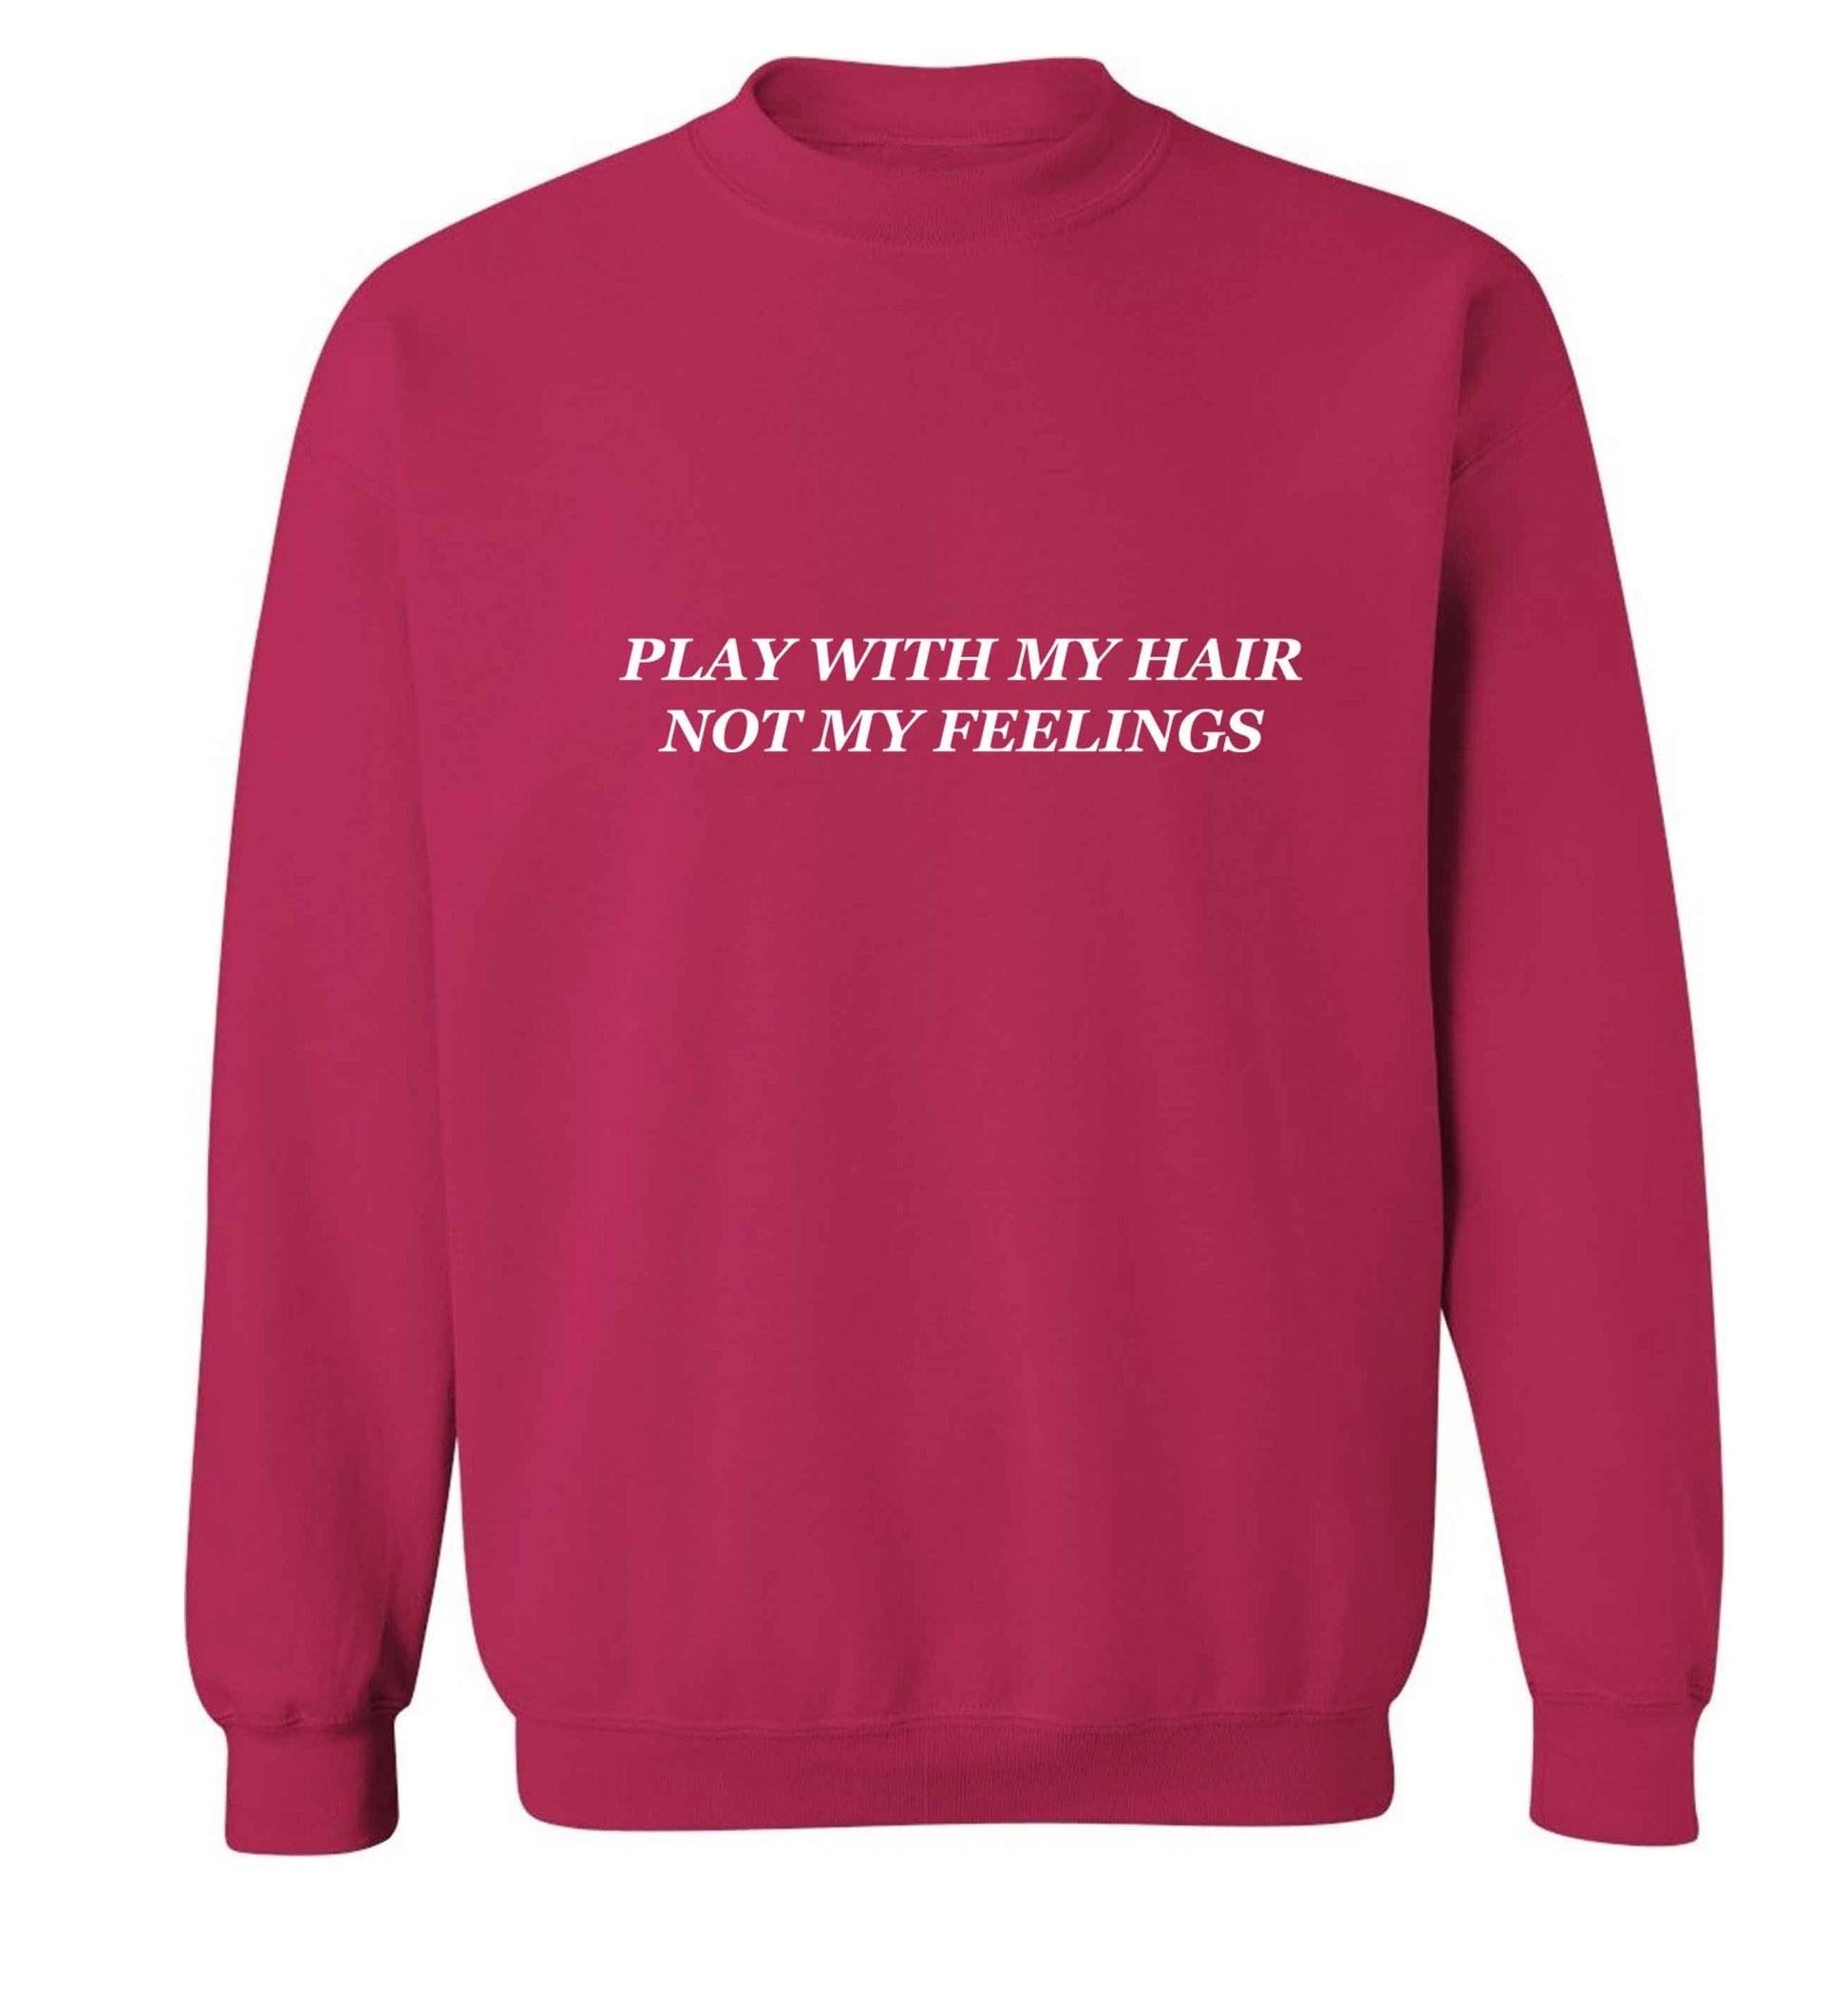 Play with my hair not my feelings adult's unisex pink sweater 2XL